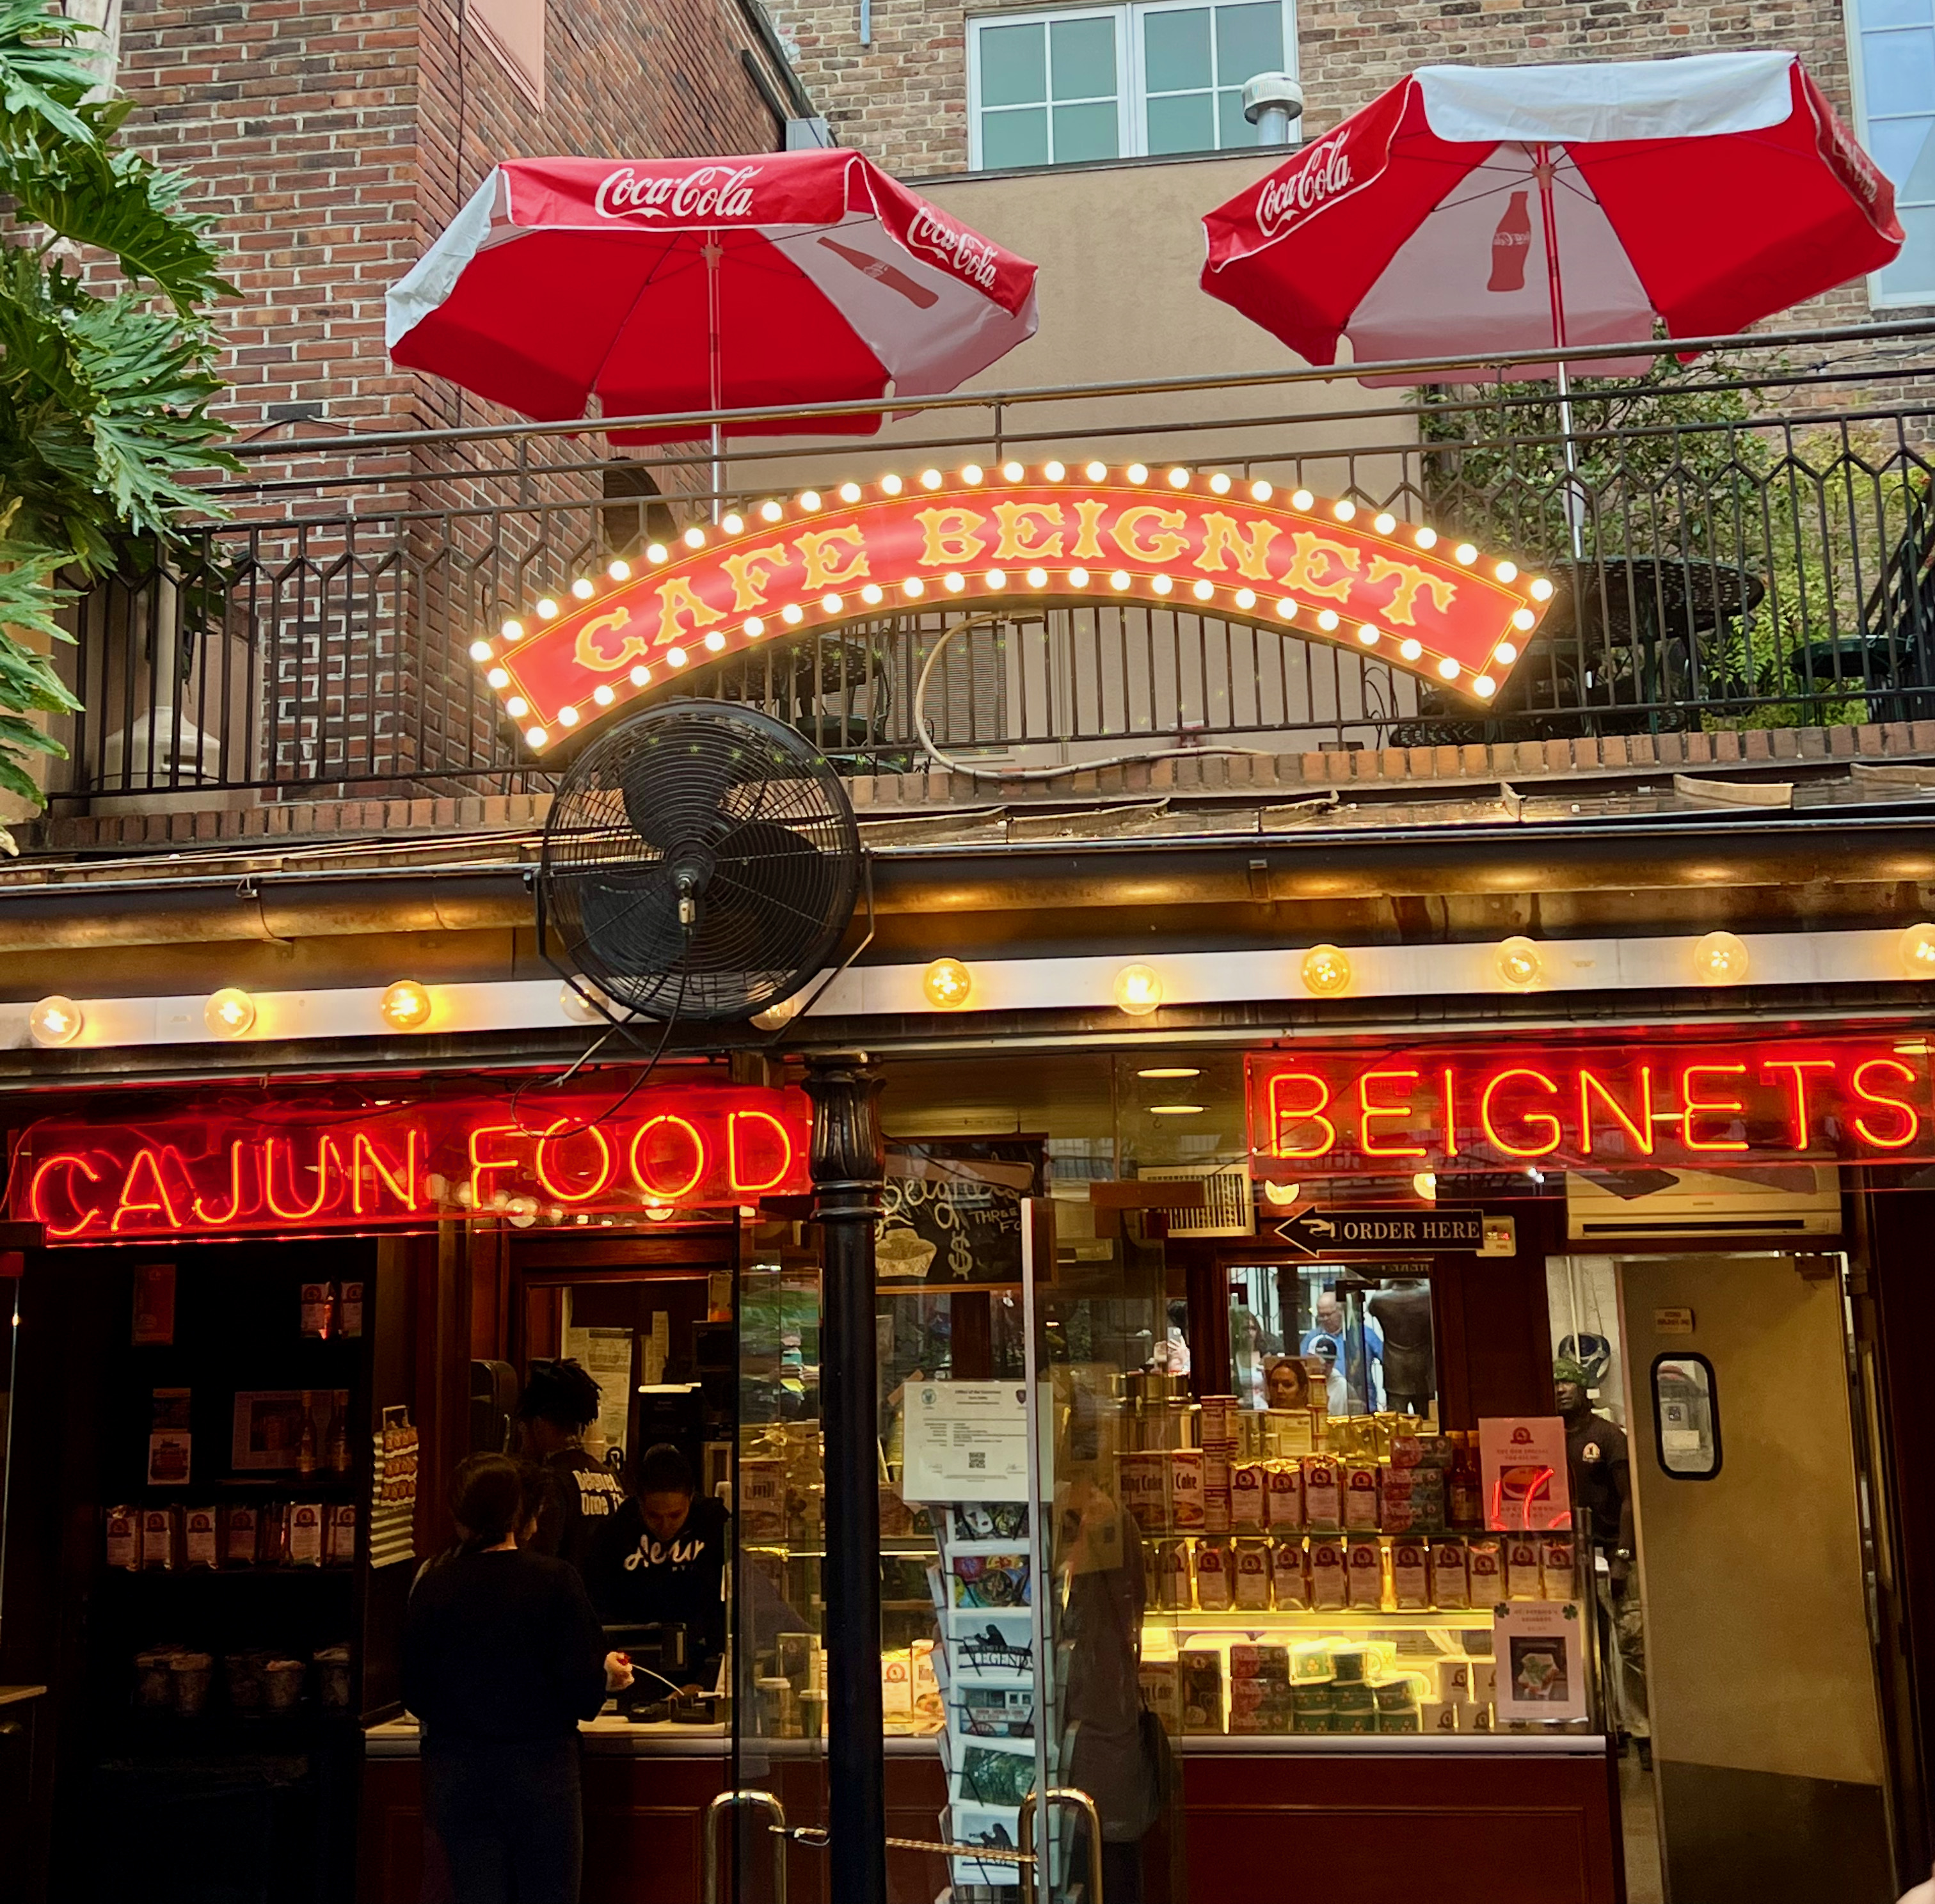 The entrance to Café Beignet on Bourbon St, which is adorned with a bright red sign that says "Cafe Beignet" and two red neon signs below it that say Cajun Food and Beignets